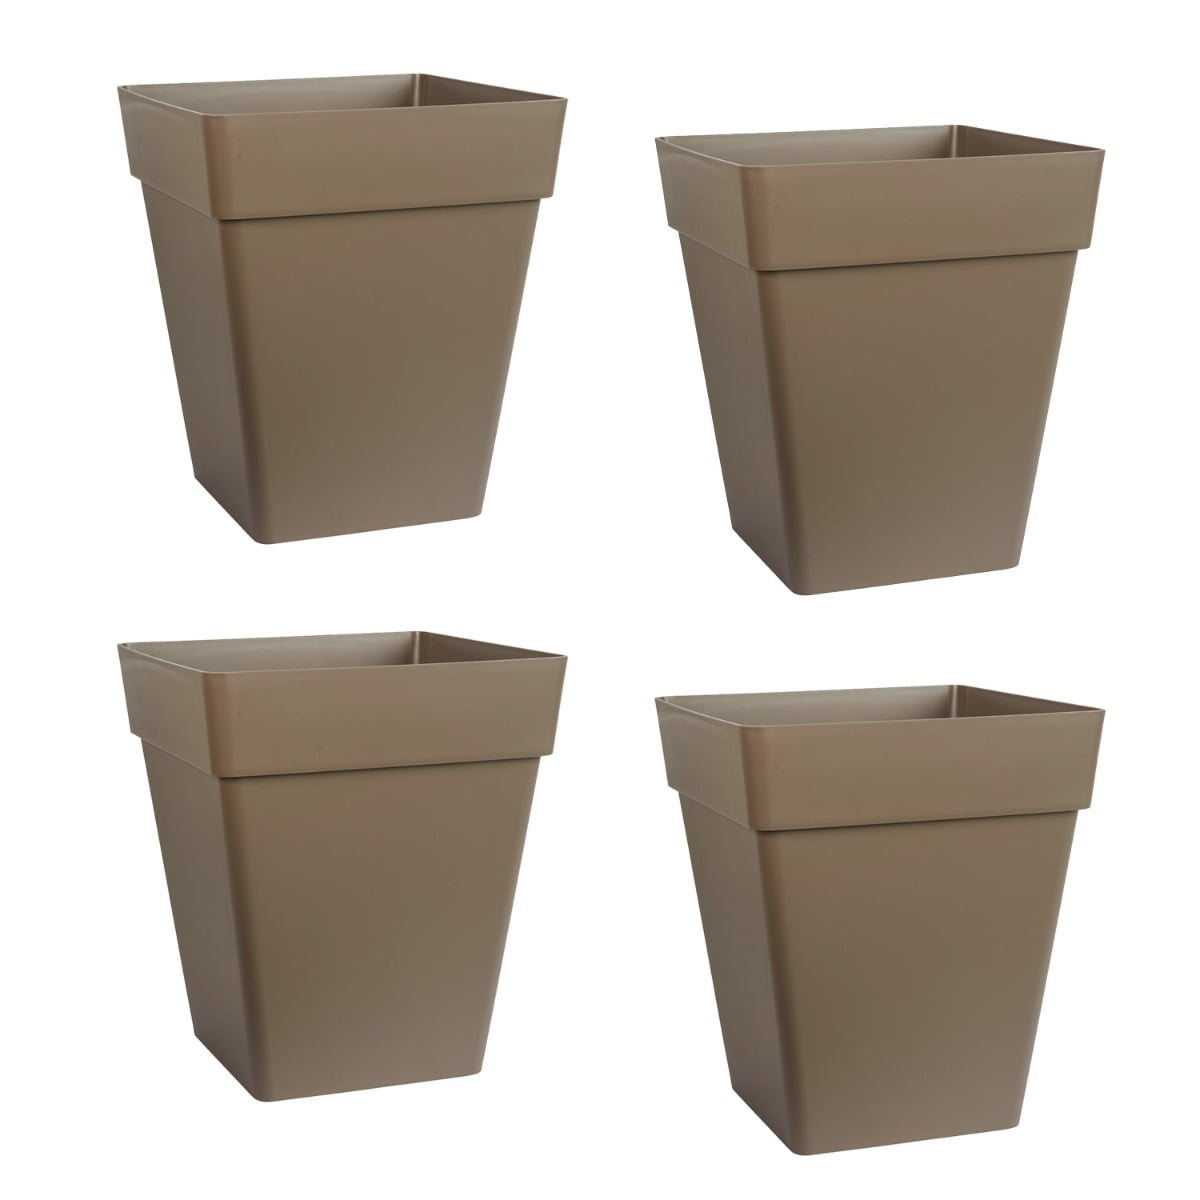 11-in Square Brown Plastic Garden Planter with Drainage Holes 1 2 or 4 Pack 